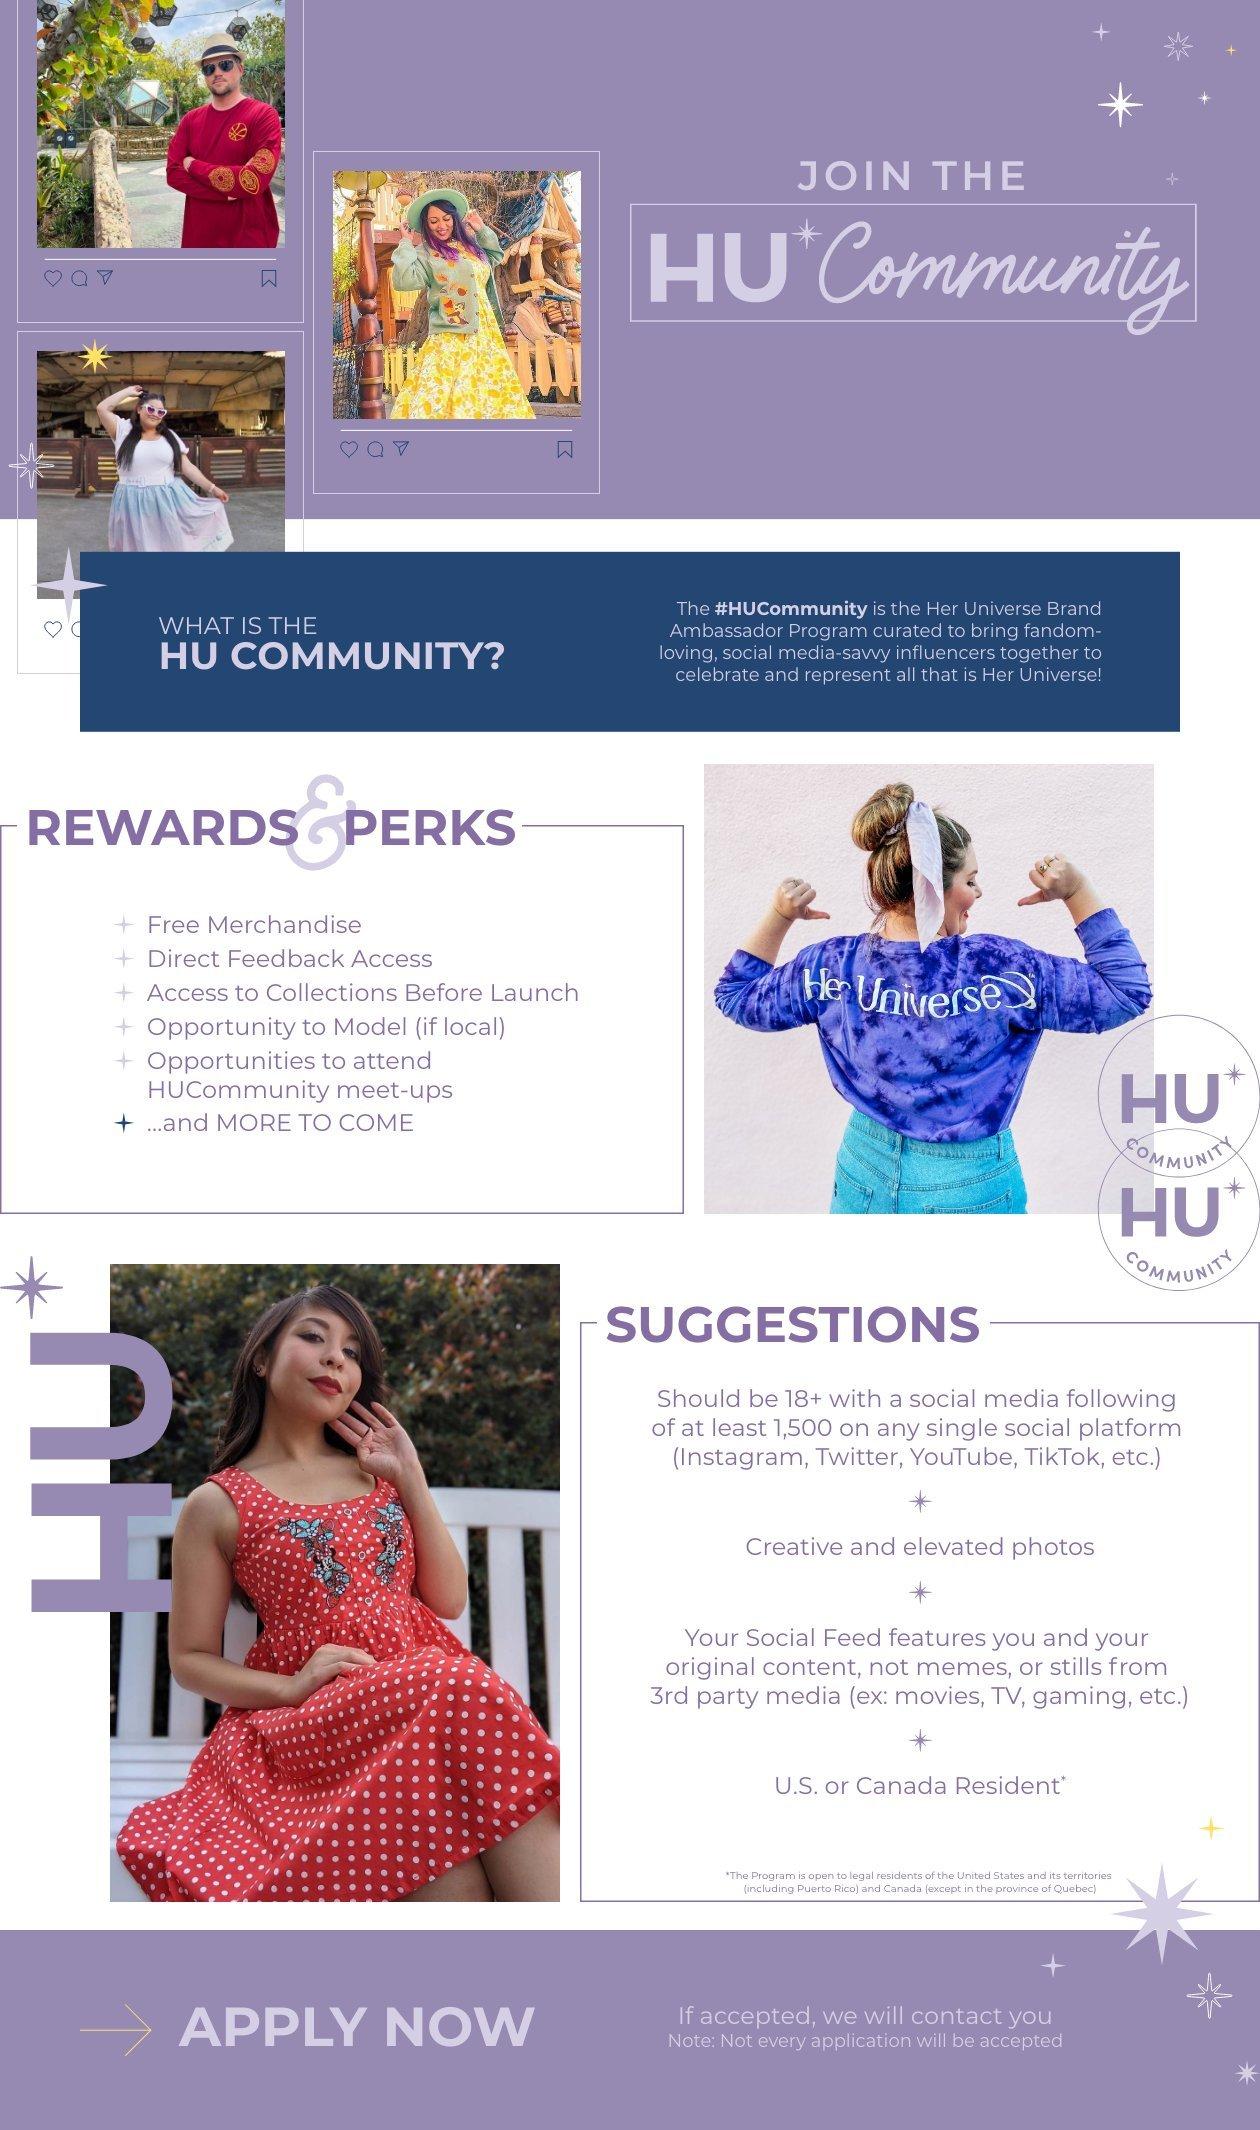 Join the HU Community, What is the hu community. the Hu community is the her universe brand ambassador program curated to bring fandom loving, social media savy influencers together to celebrate and represent all that is her universe! Rewards and Perks include Free Merchandise, Direct Feedback Access, Access to Collections Before Launch, Opportunity to Model (if local), Opportunities to attend, HU Community meet-ups, and more to come, Suggestions, Should be 18+ with a social media following of at least 1,500 on any single social platform (Instagram, Twitter, Youtube, TikTok, etc.). creative and elevated photos, Your Social Feed Features you and your original content, not memes, or stills from 3rd party media (ex: movies, TV, gaming, etc.) U.S. or Canada Resident. Apply Now, if accepted, we will contact you Note: Not every application will be accepted